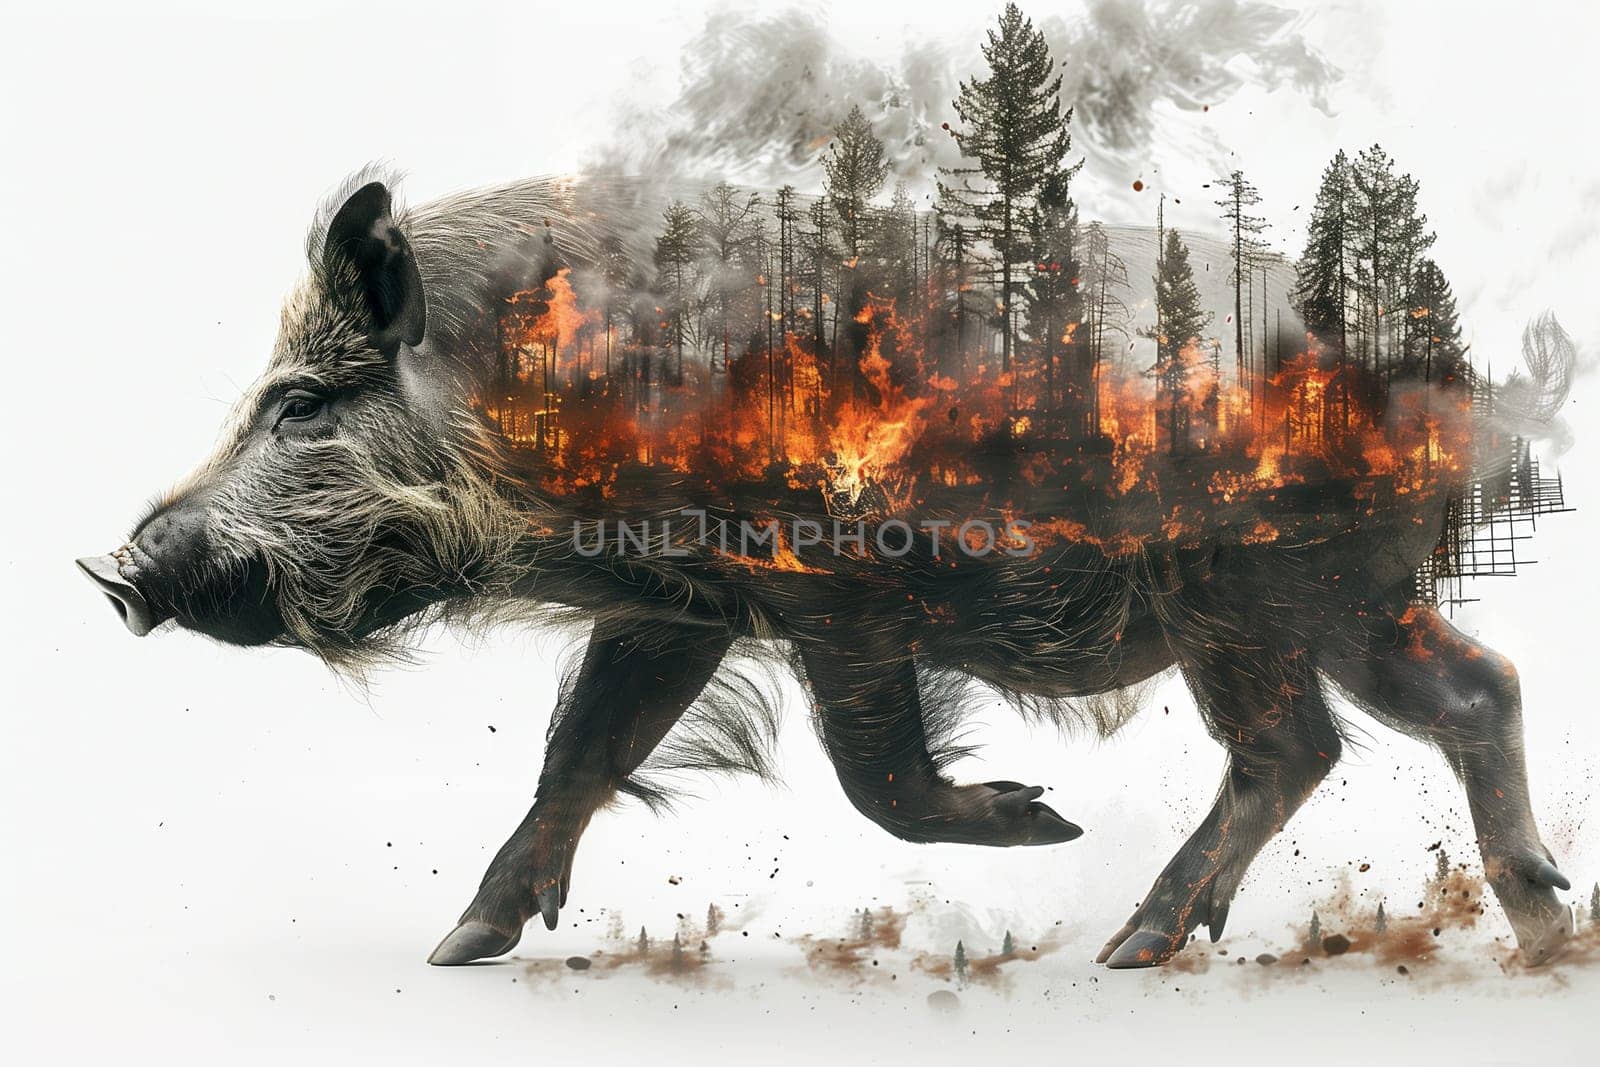 A wild boar walks, with forest fire imagery incorporated into its body, illustrating the devastating impact of wildfires on animal habitats.